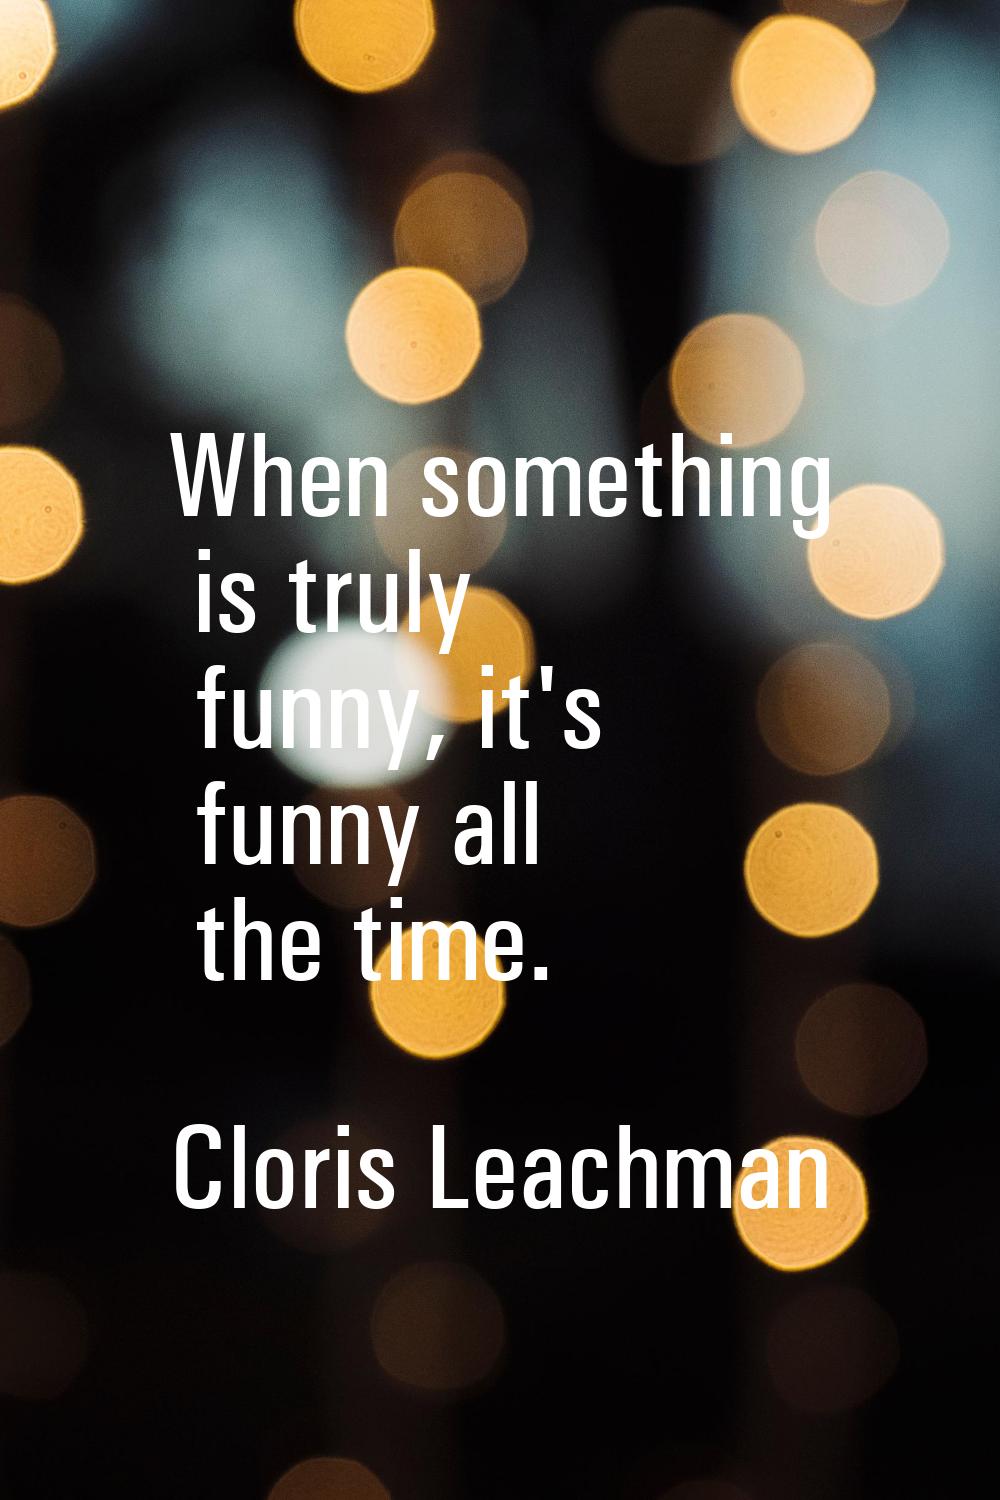 When something is truly funny, it's funny all the time.